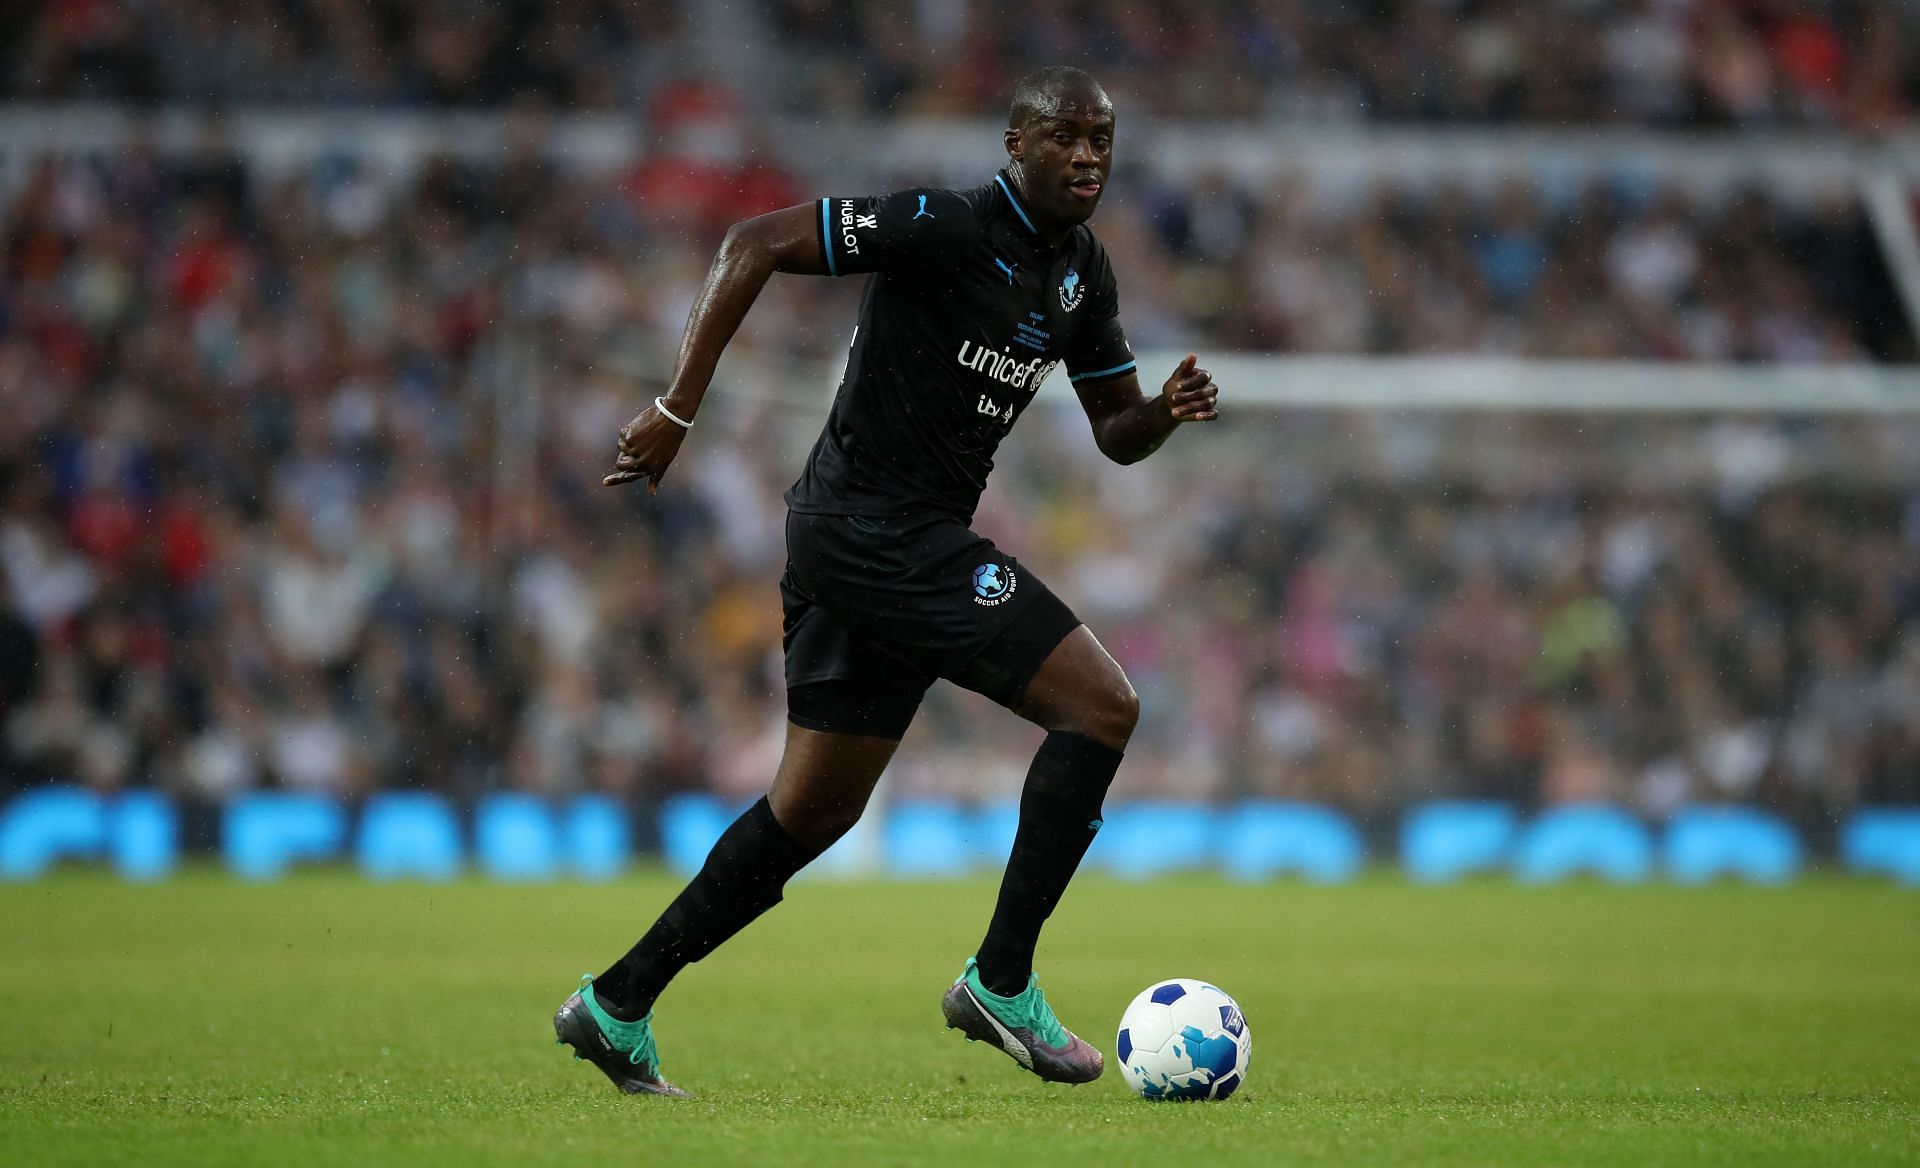 Yaya Toure was a player of repute during his time with Barcelona and Manchester City.